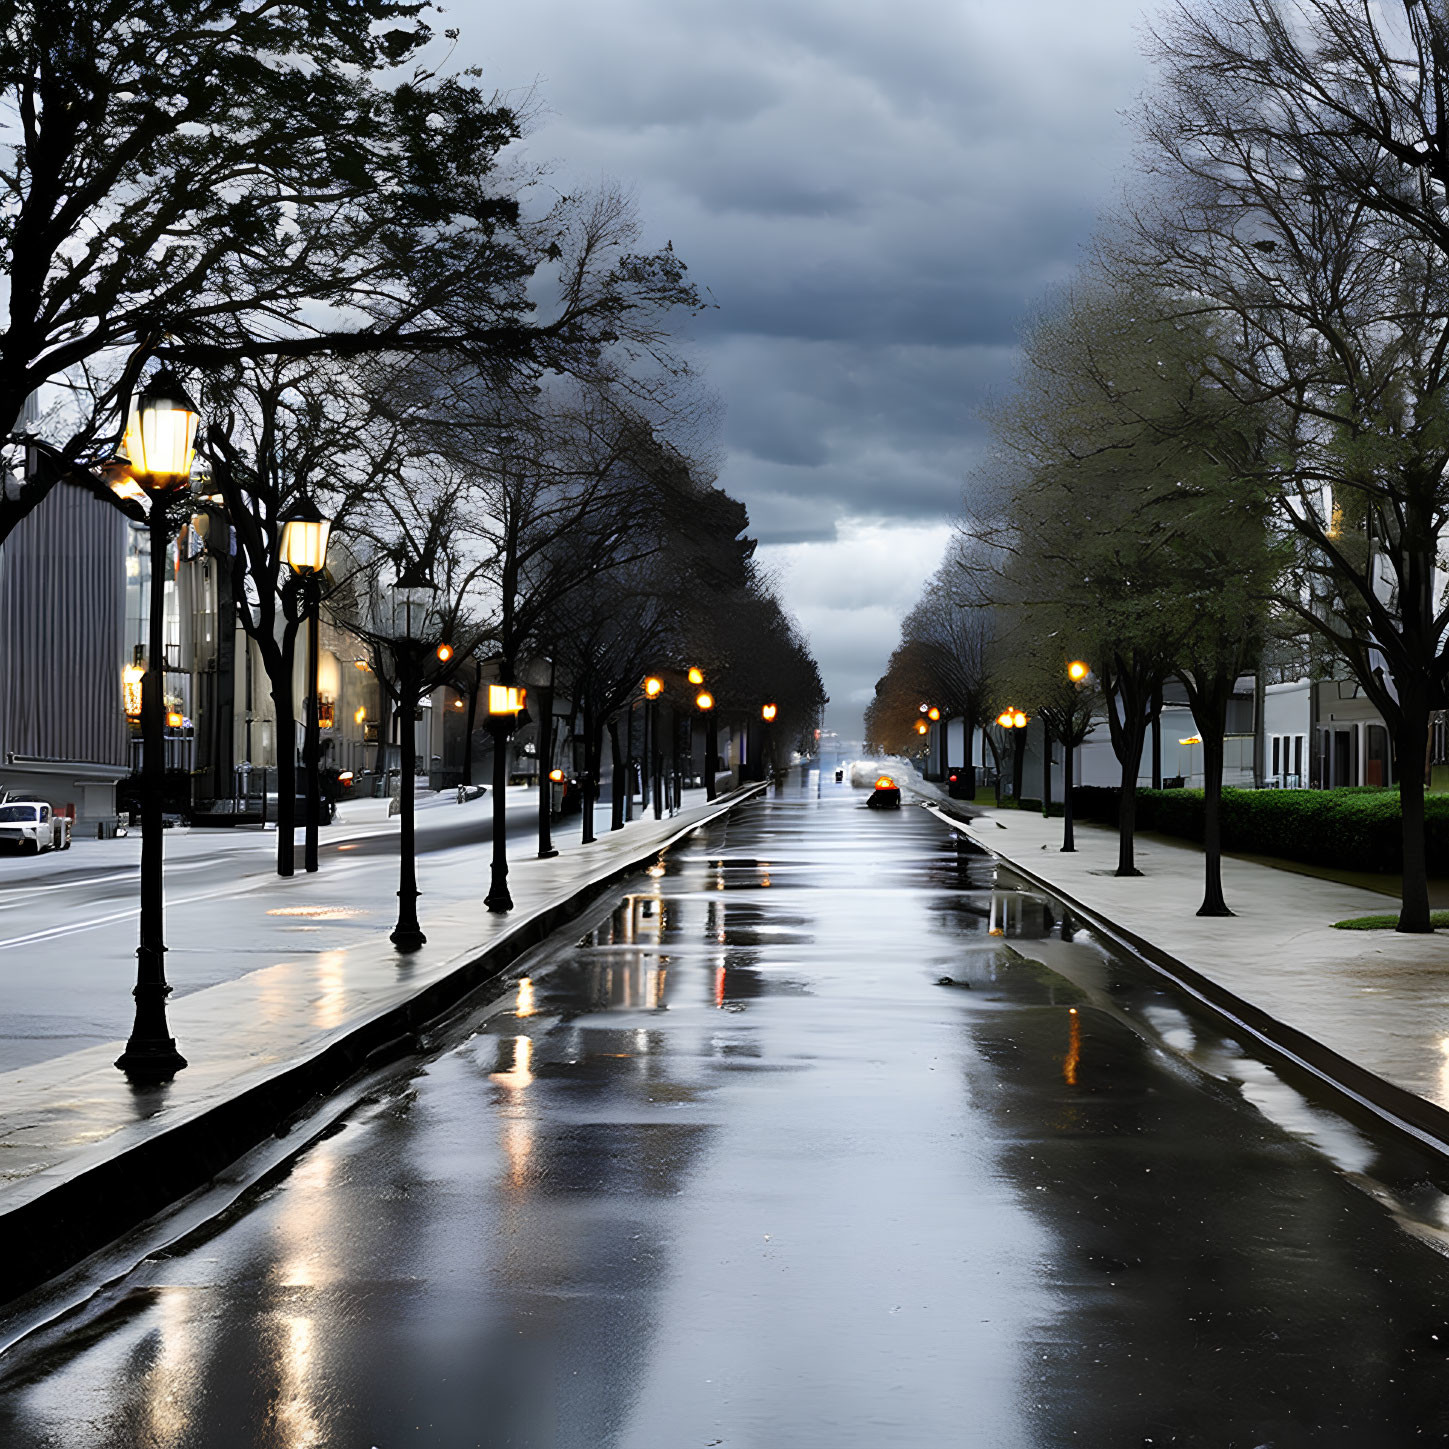 Glowing street lamps and trees on wet street under stormy sky